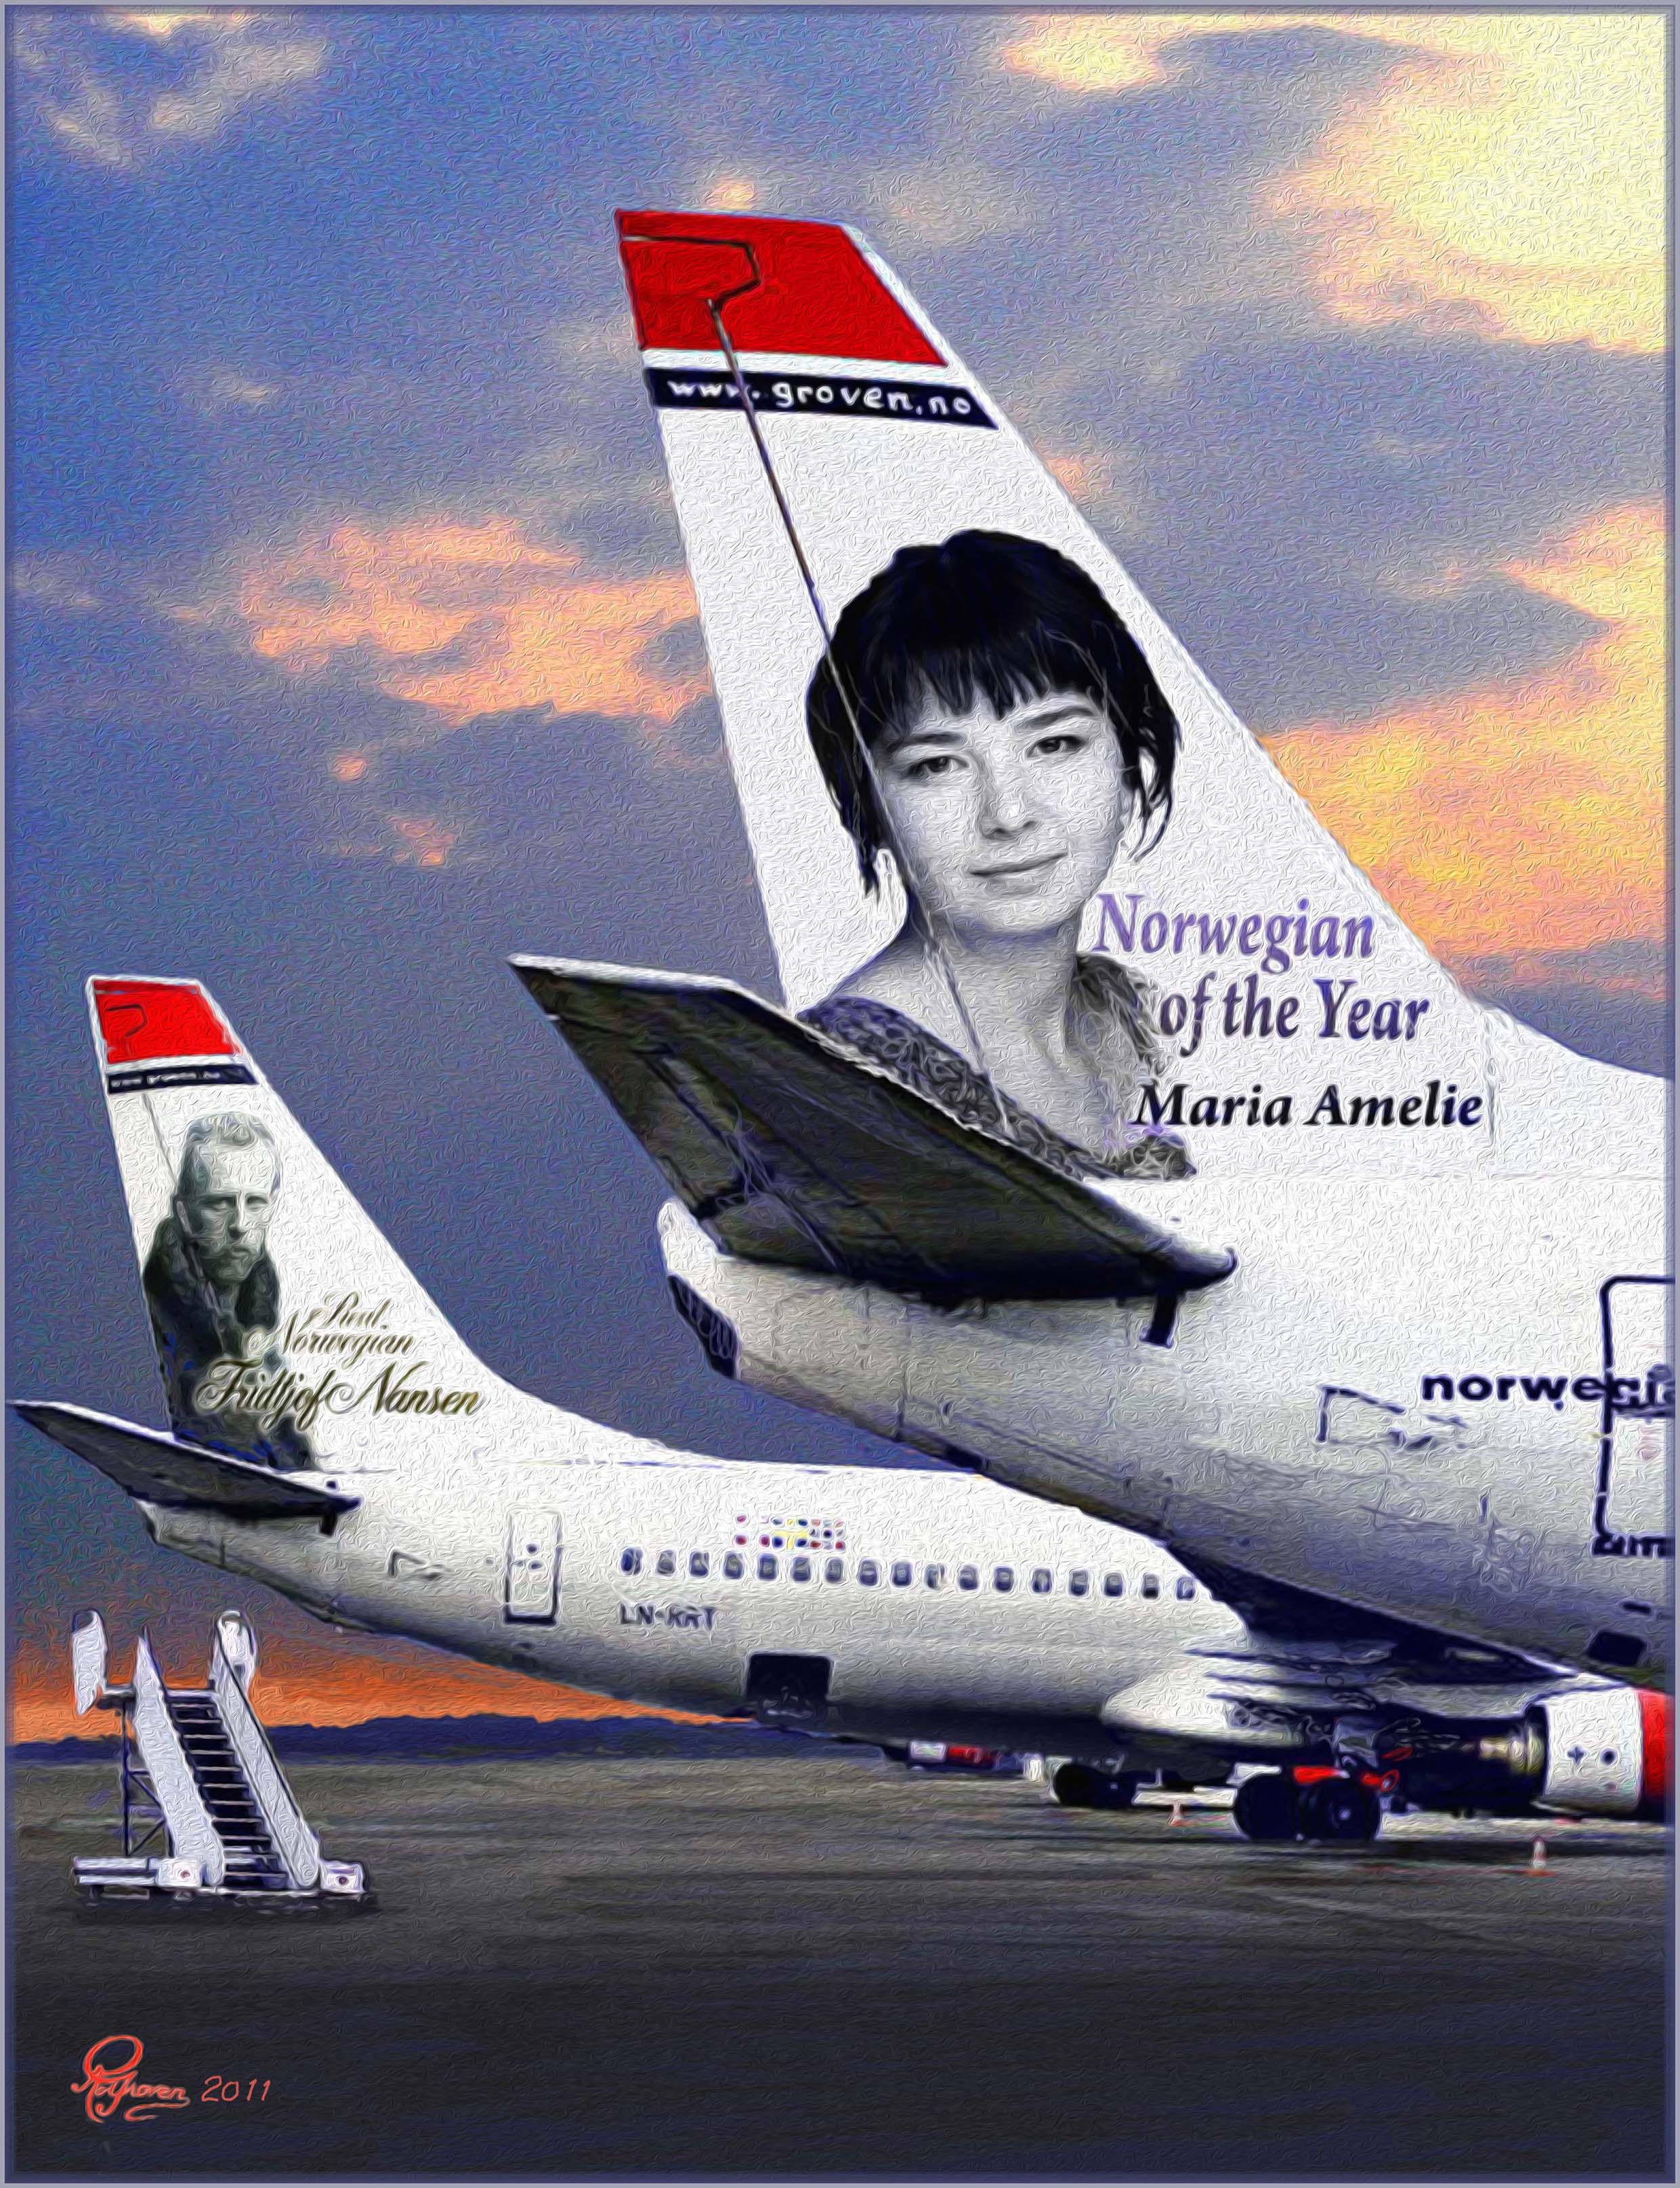 Maria Amelie. The Norwegian of the year